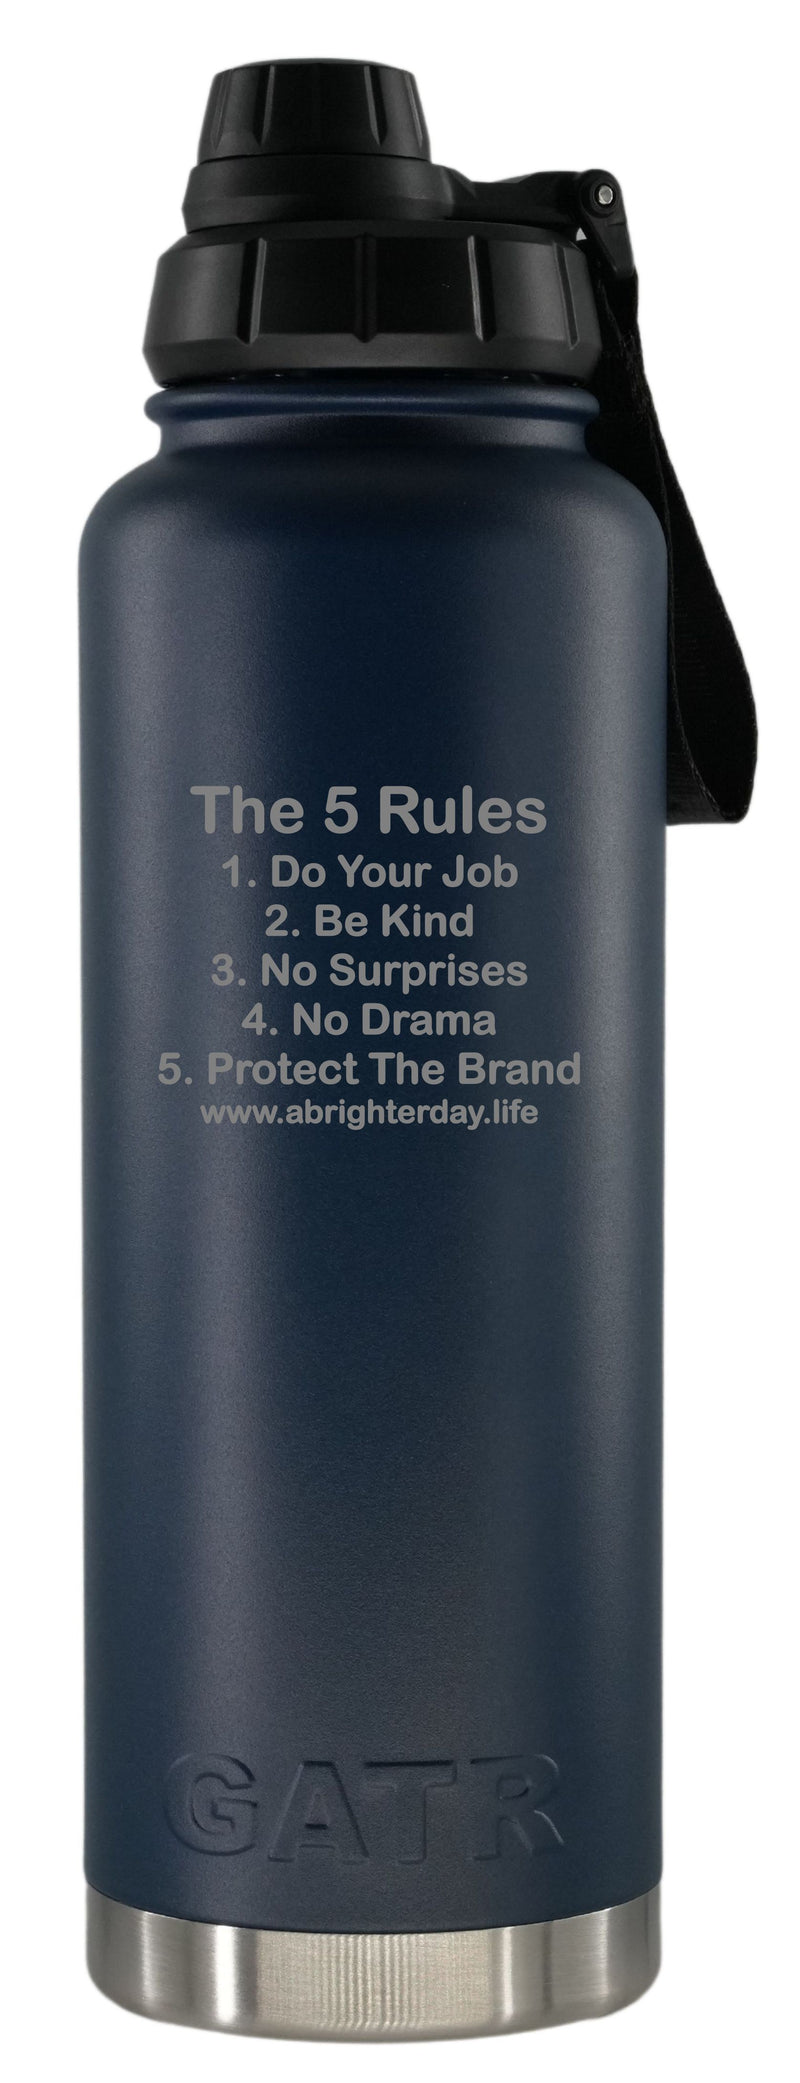 The 5 Rules 40oz Bottle